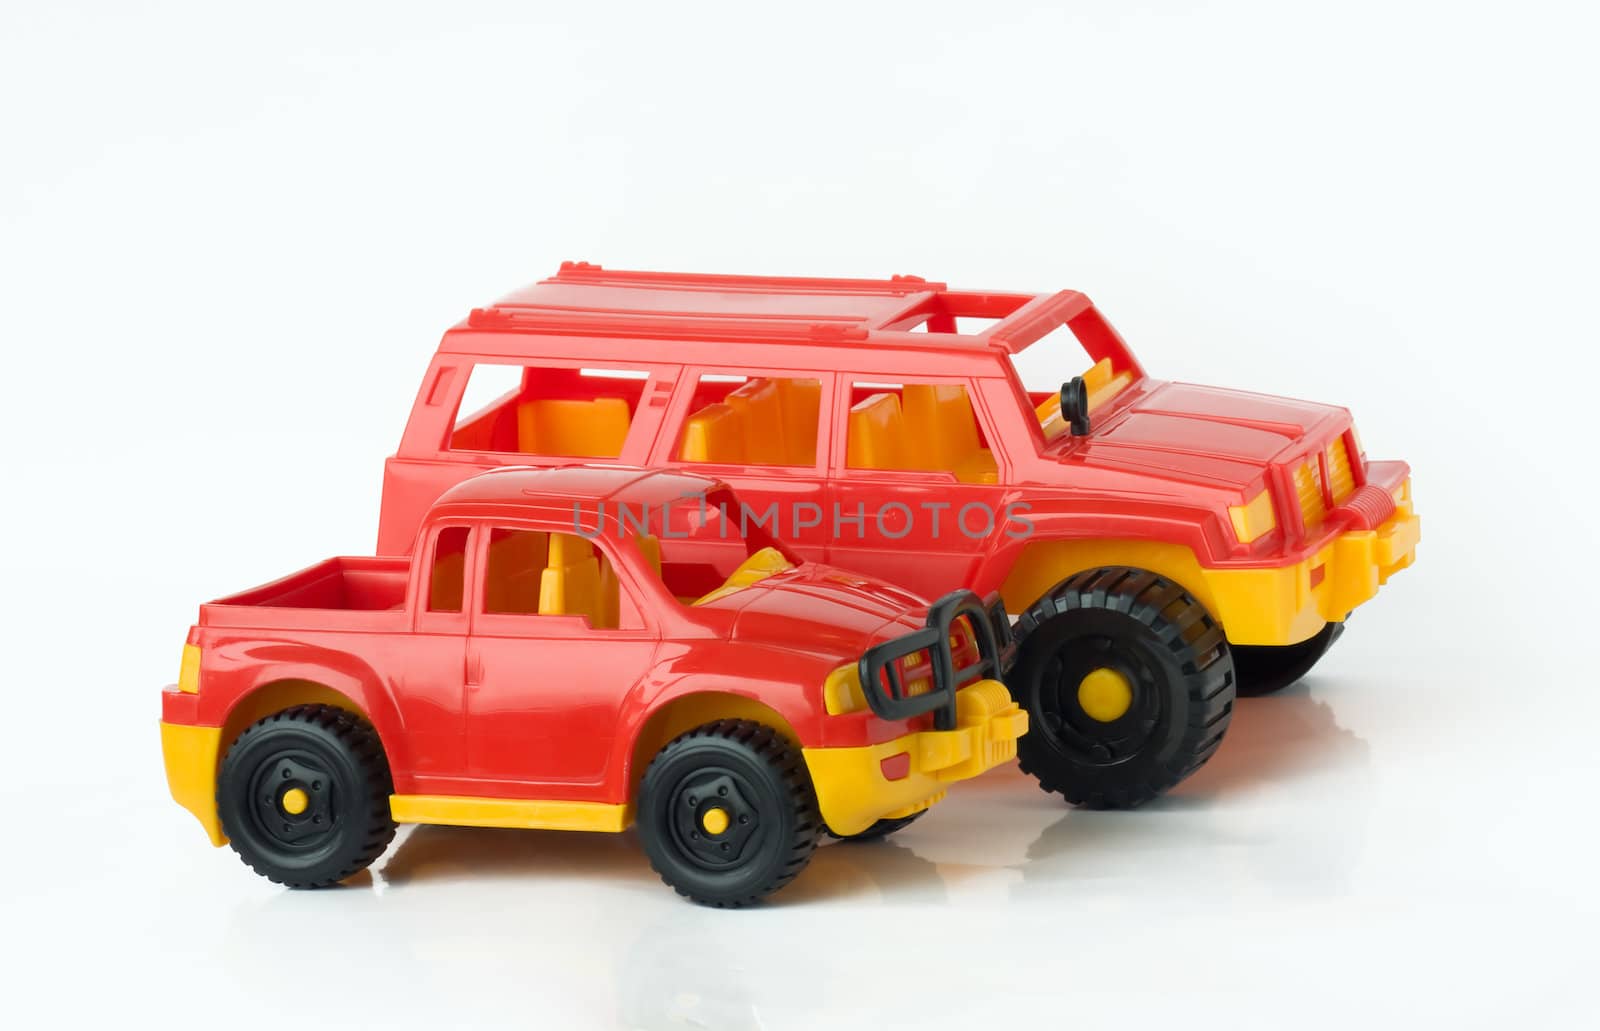 Two toy cars, isolated on a white background.